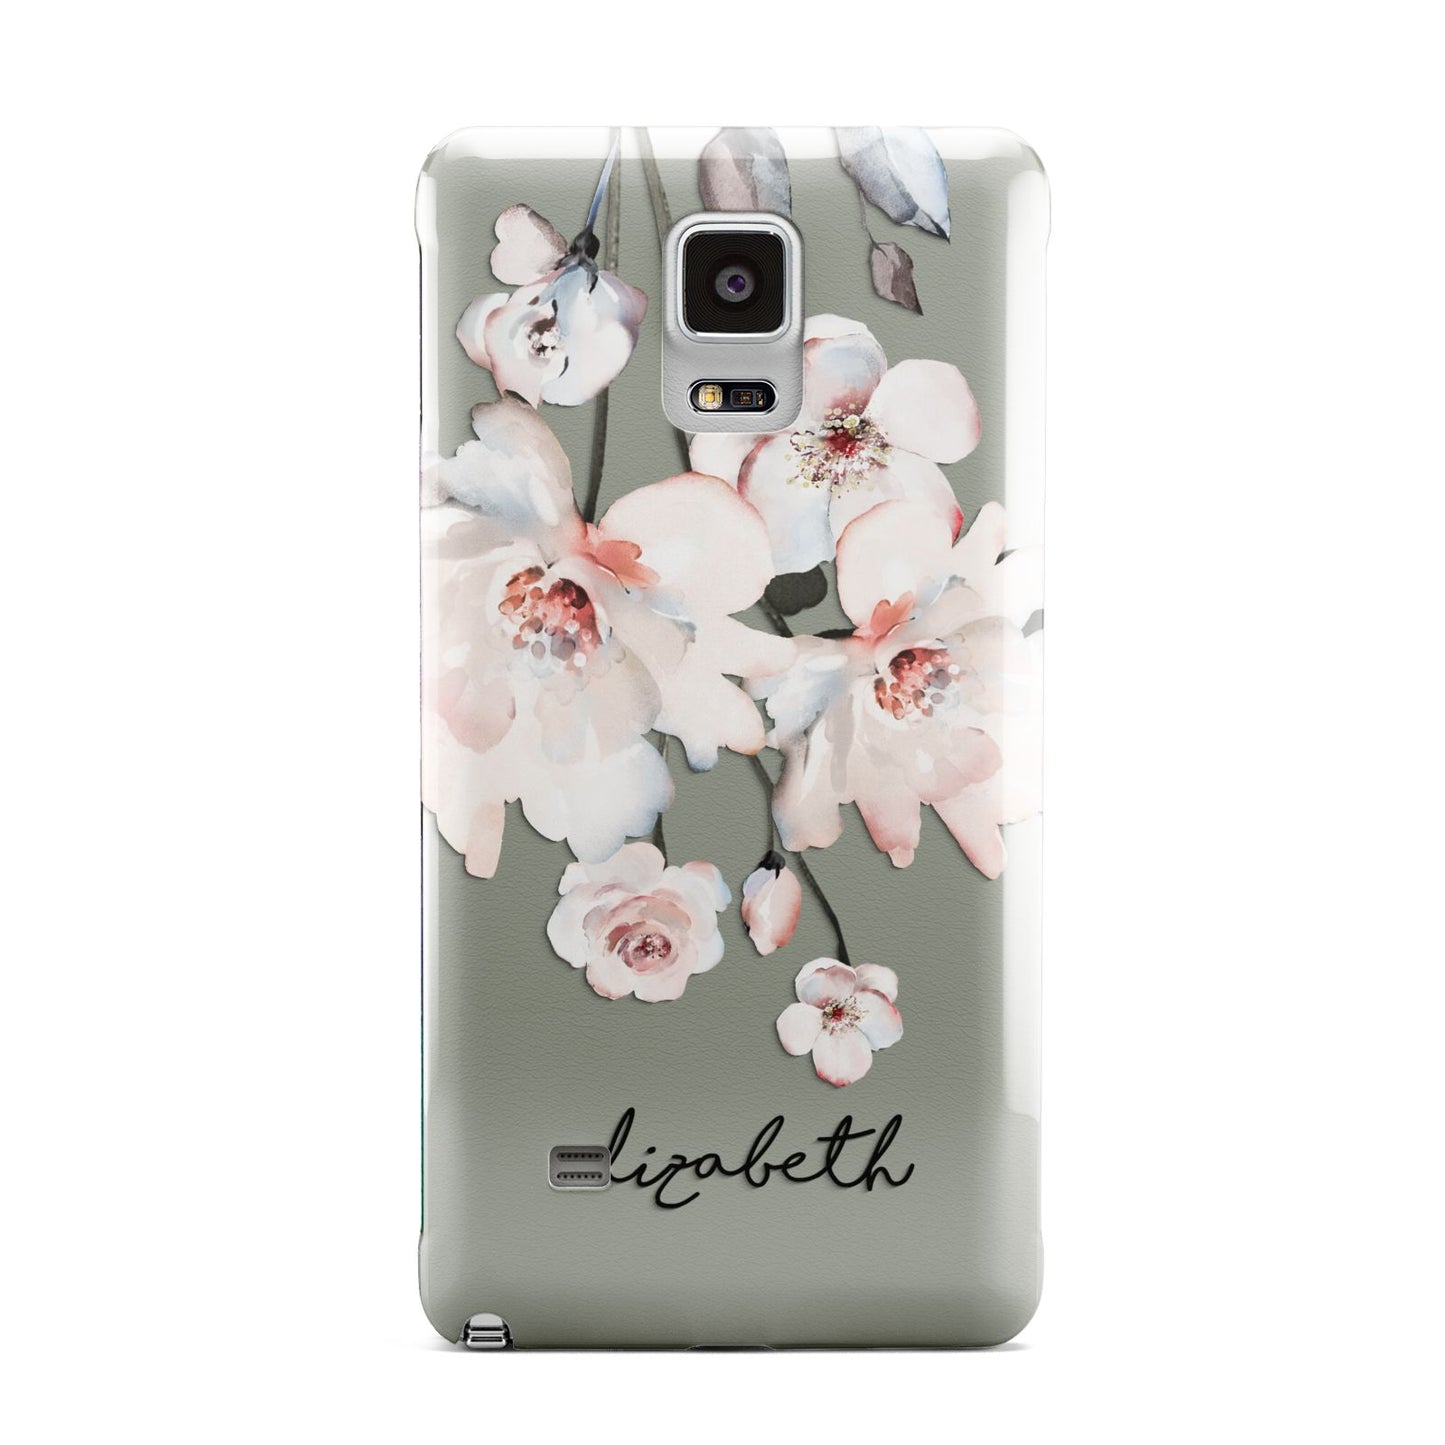 Personalised Name Roses Watercolour Samsung Galaxy Note 4 Case